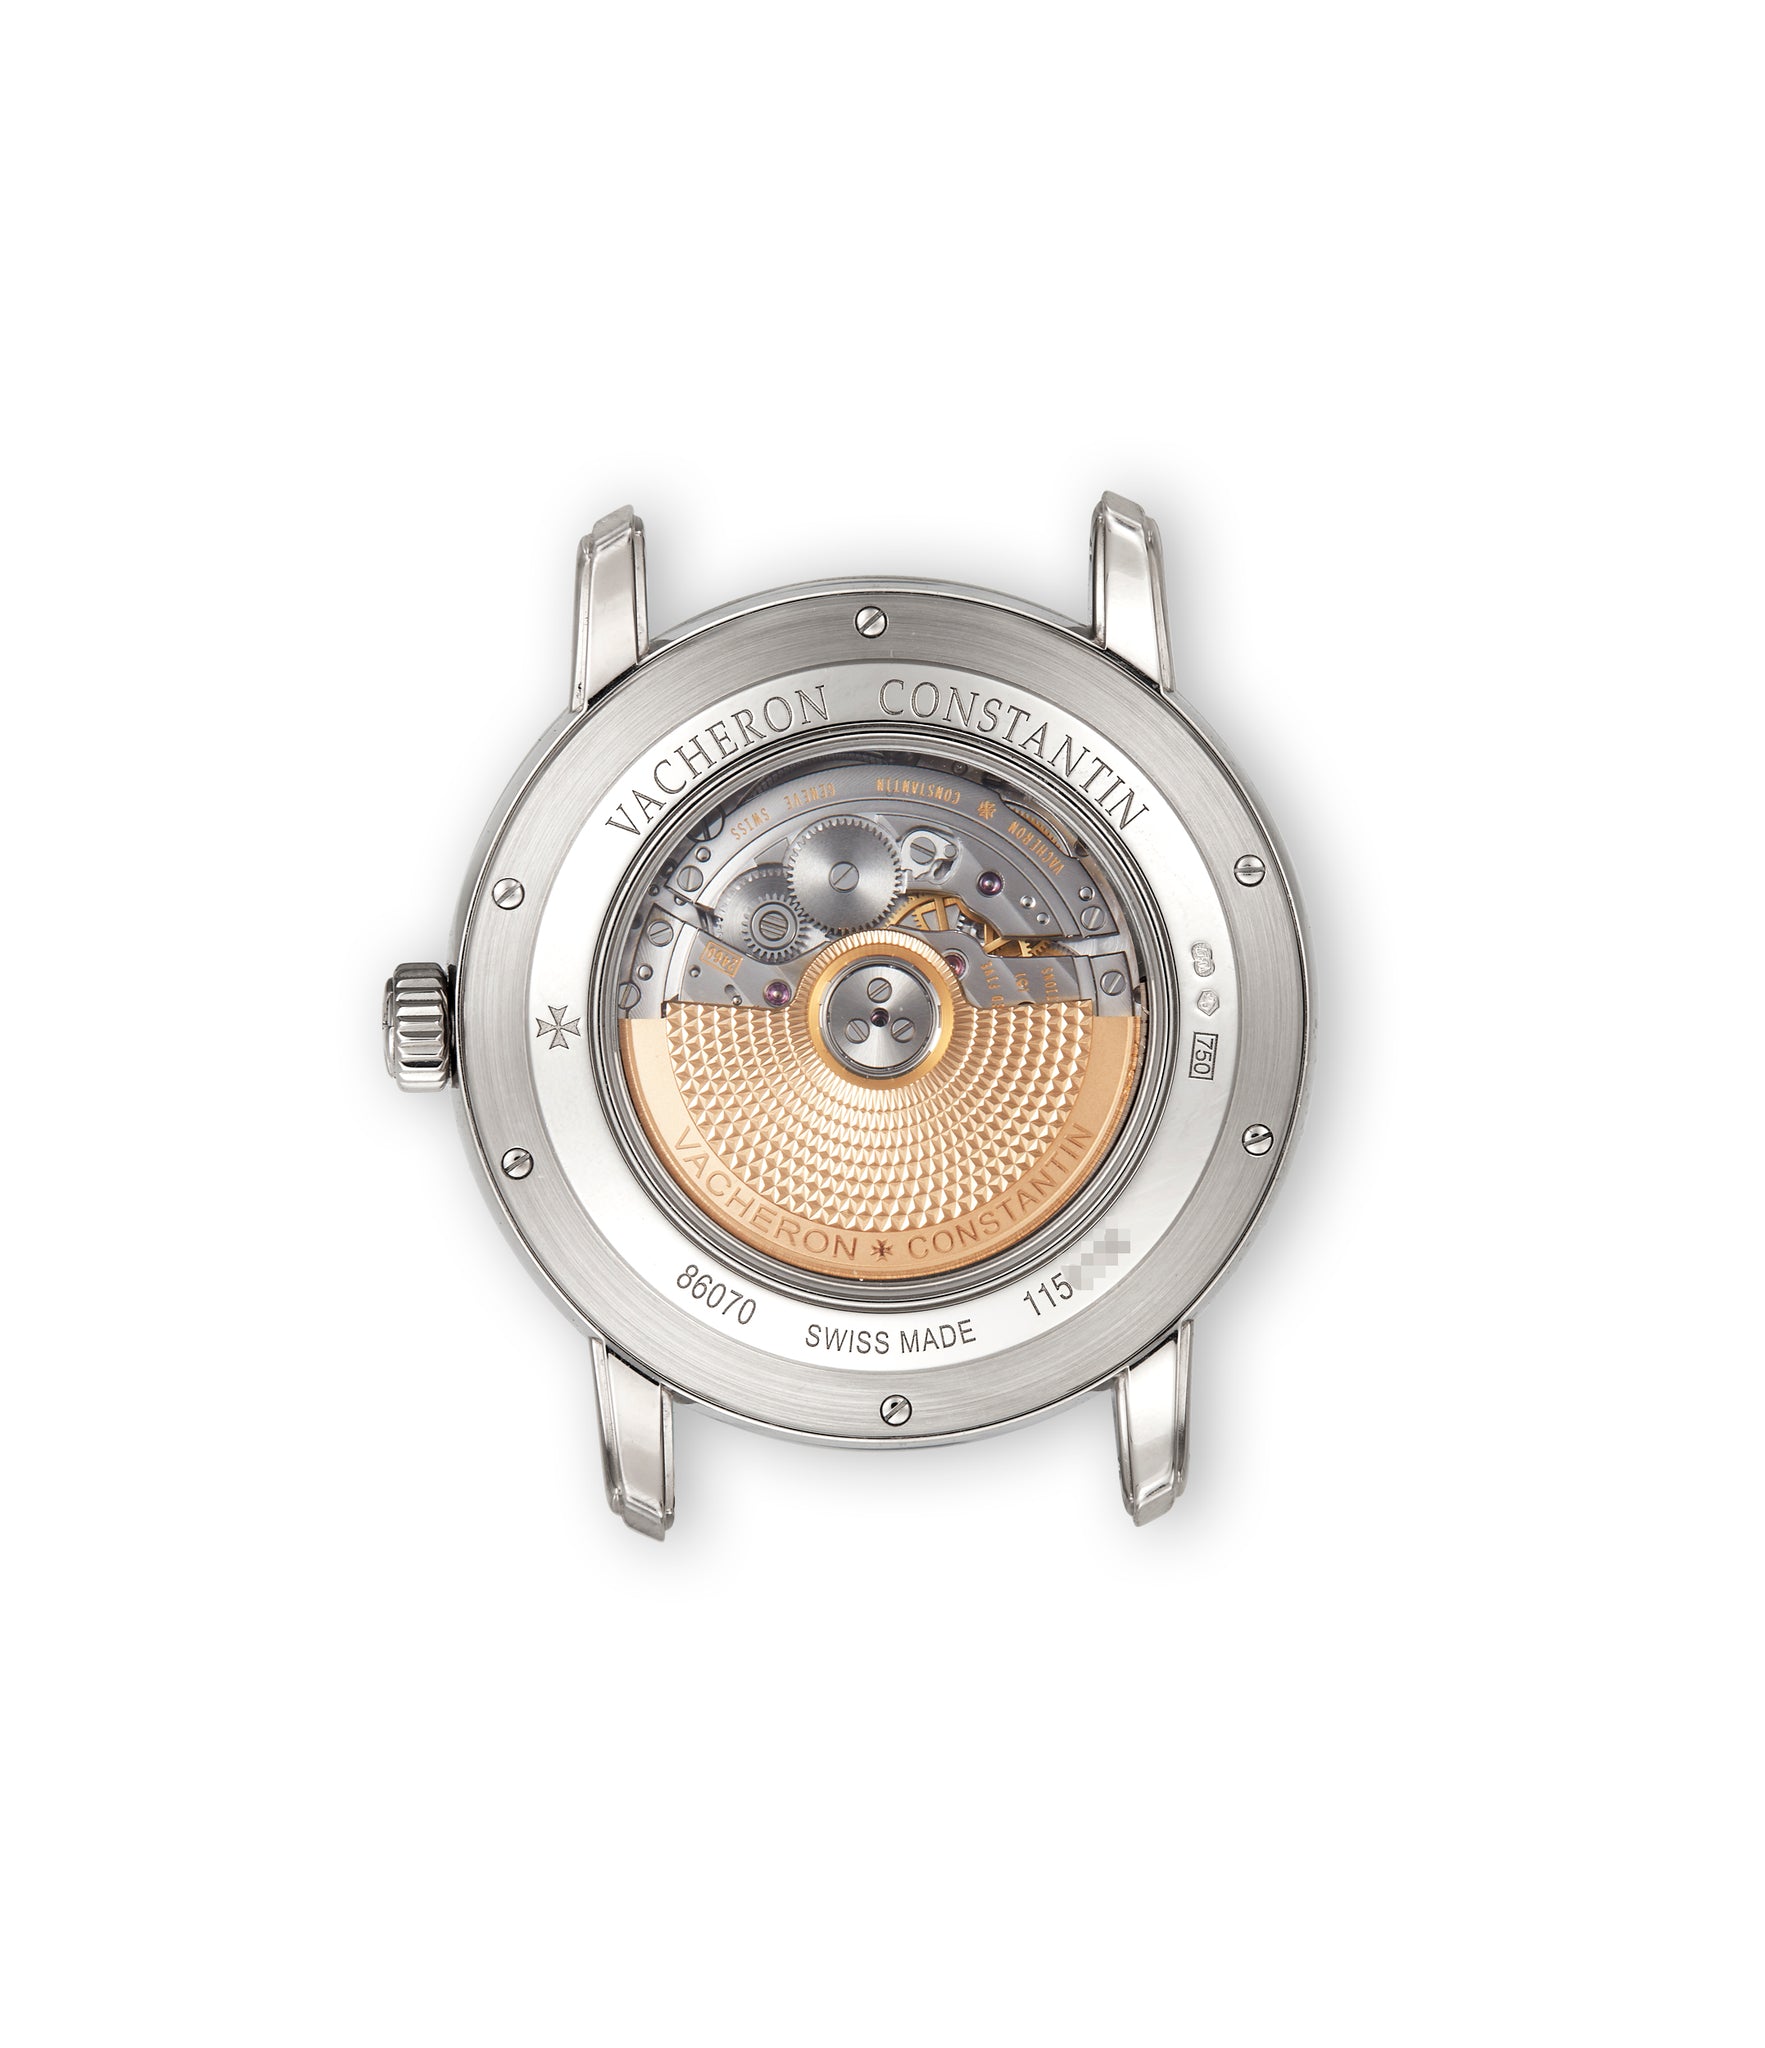 caseback Vacheron Constantin Metiers d’Arts “Les Masques” 86070/000G-9399 White Gold preowned watch at A Collected Man London